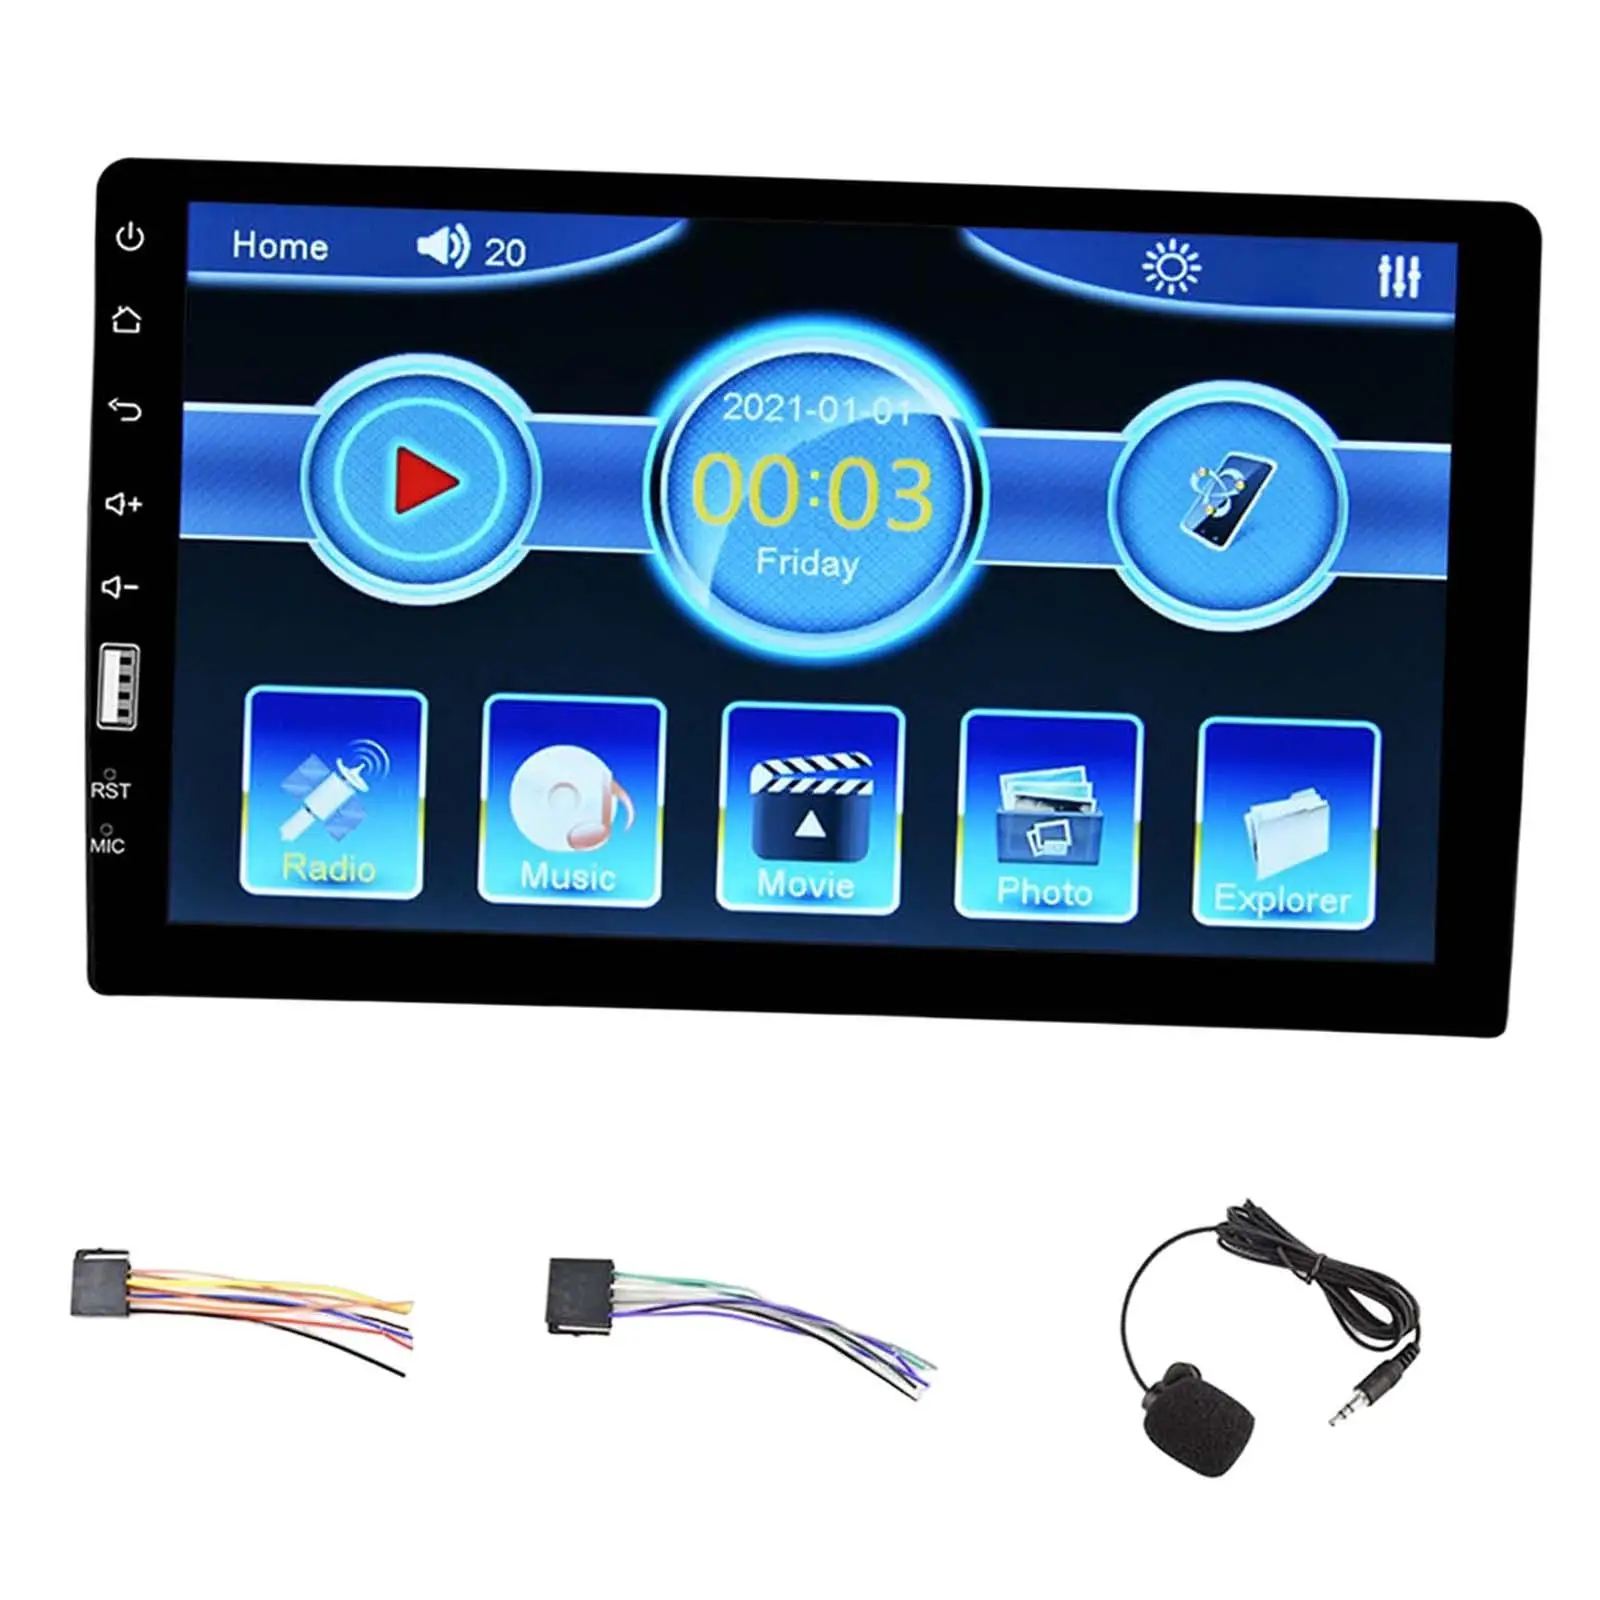 Multimedia Player Hands Free Calling Multicolor Background Lights Car Stereo Radio for Automobile